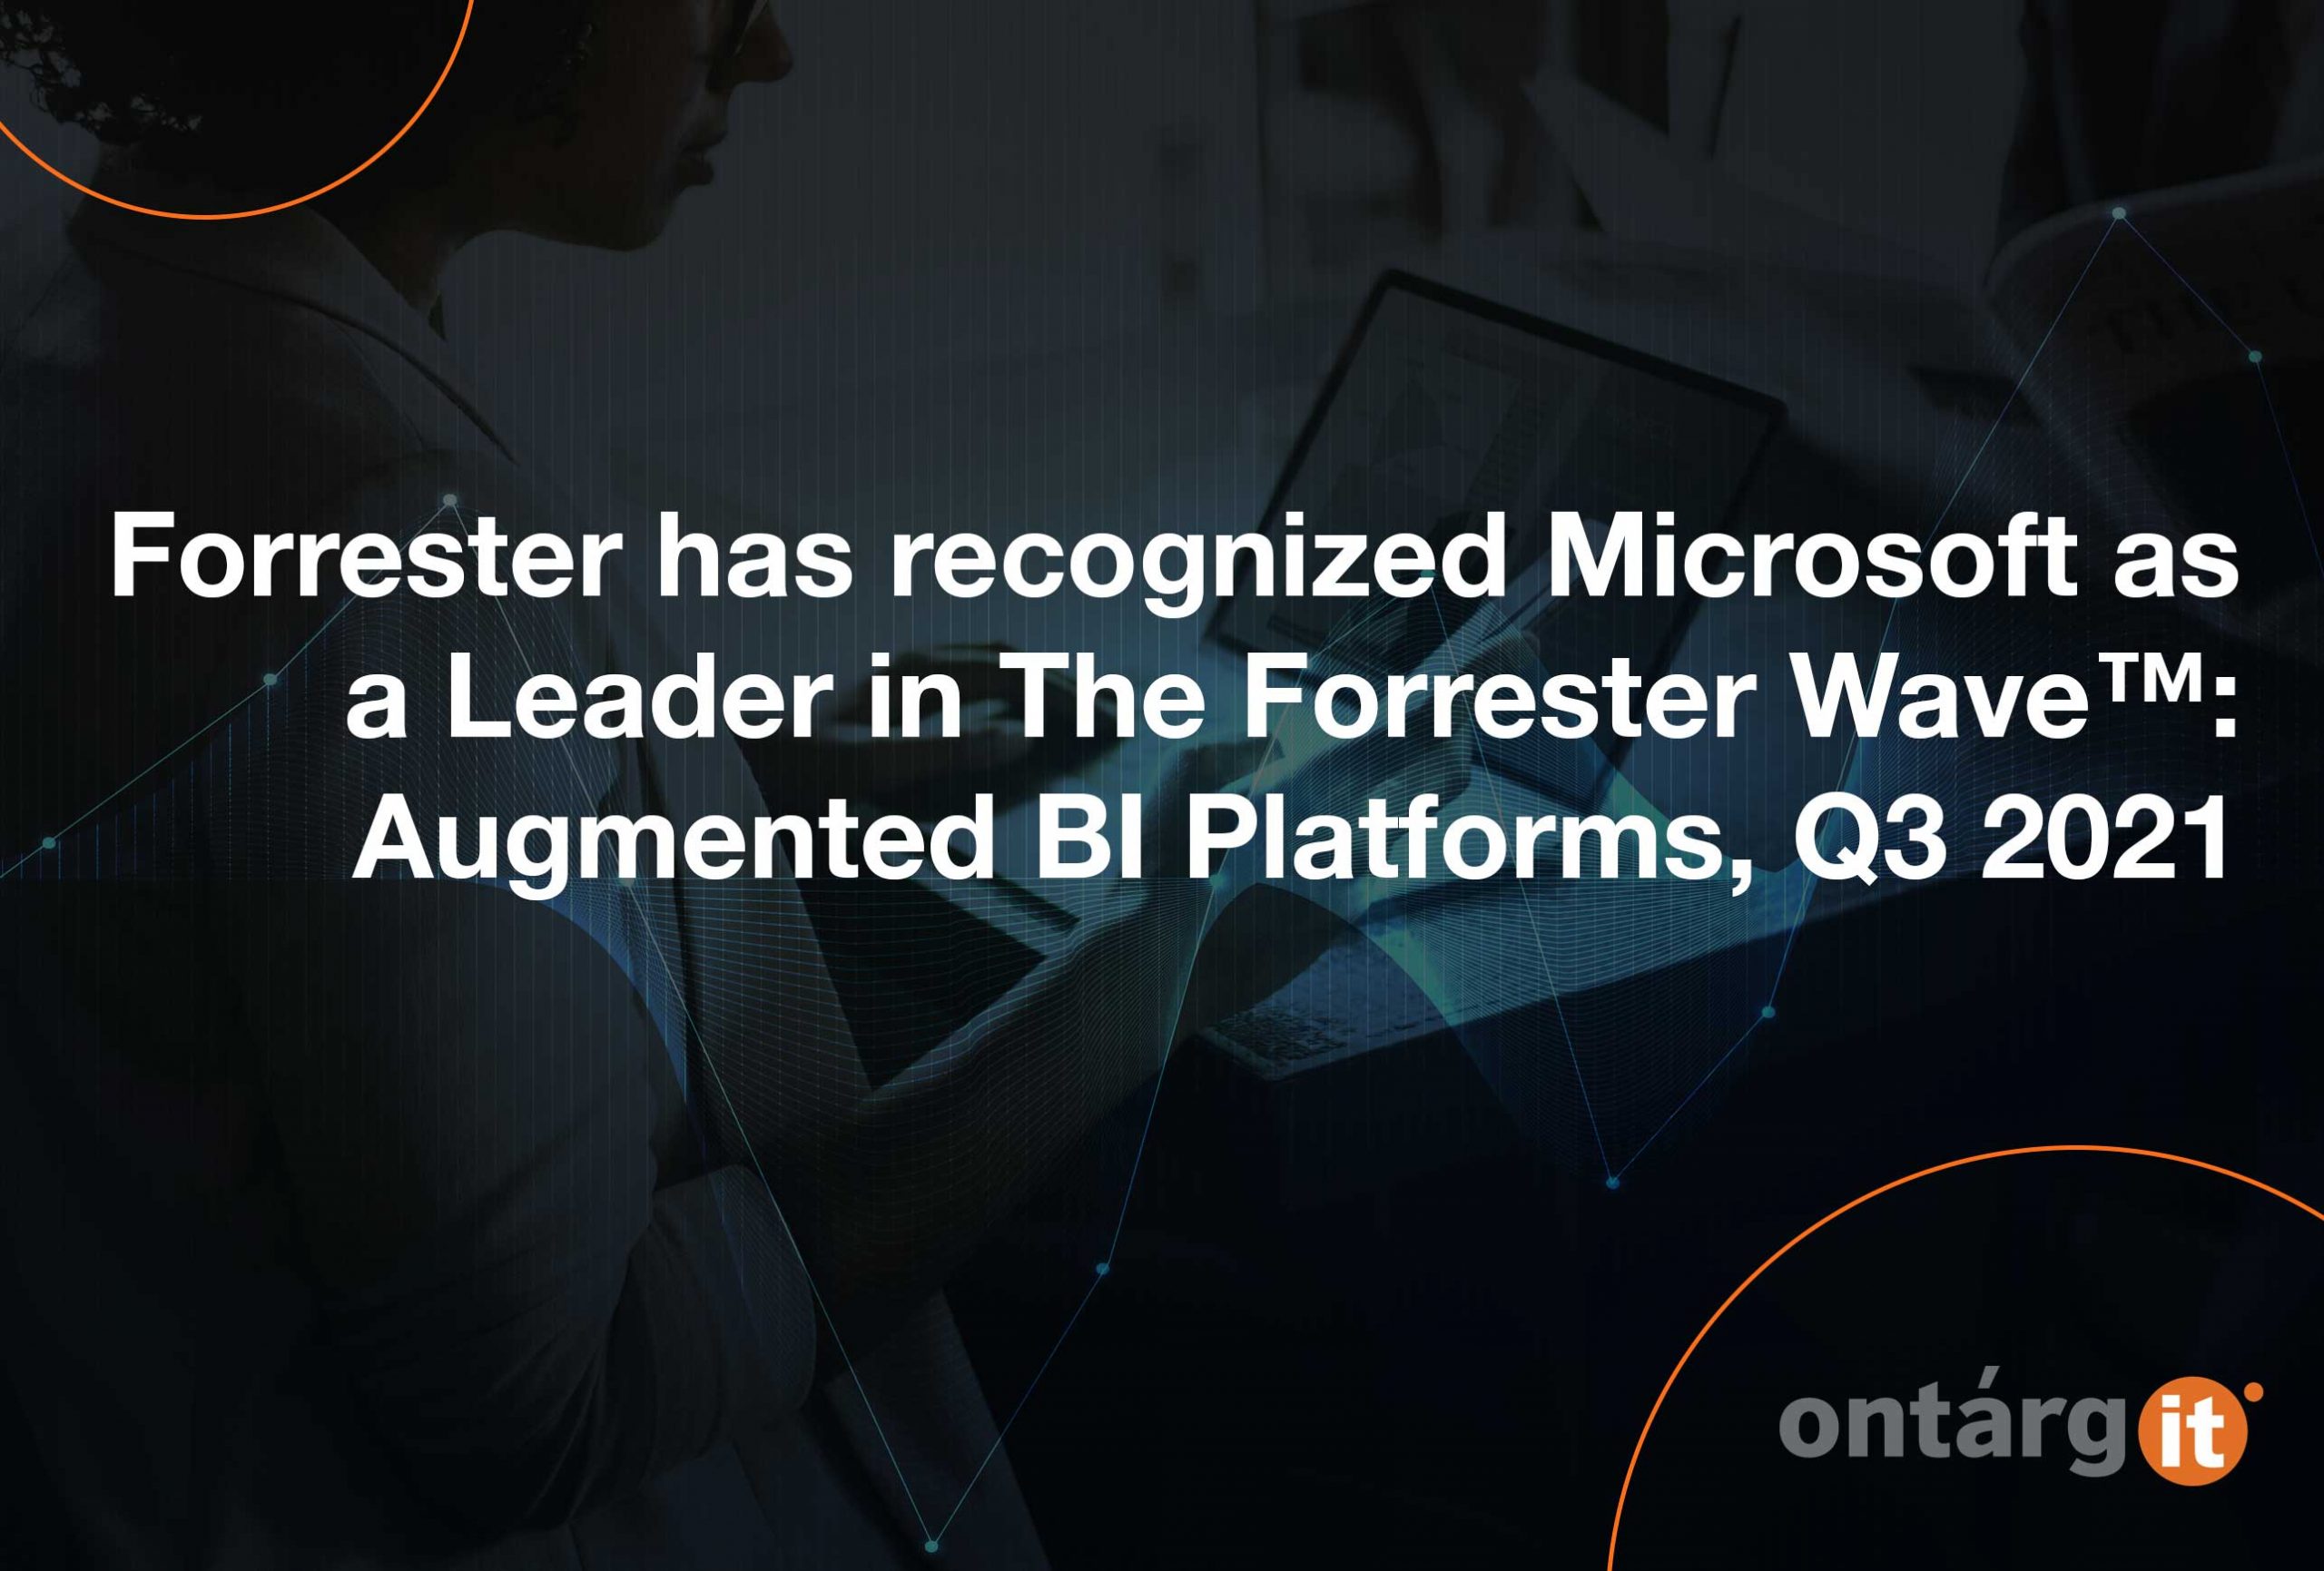 Forrester-has-recognized-Microsoft-as-a-Leader-in-The-Forrester-Wave-Augmented-BI-Platforms,-Q3-2021